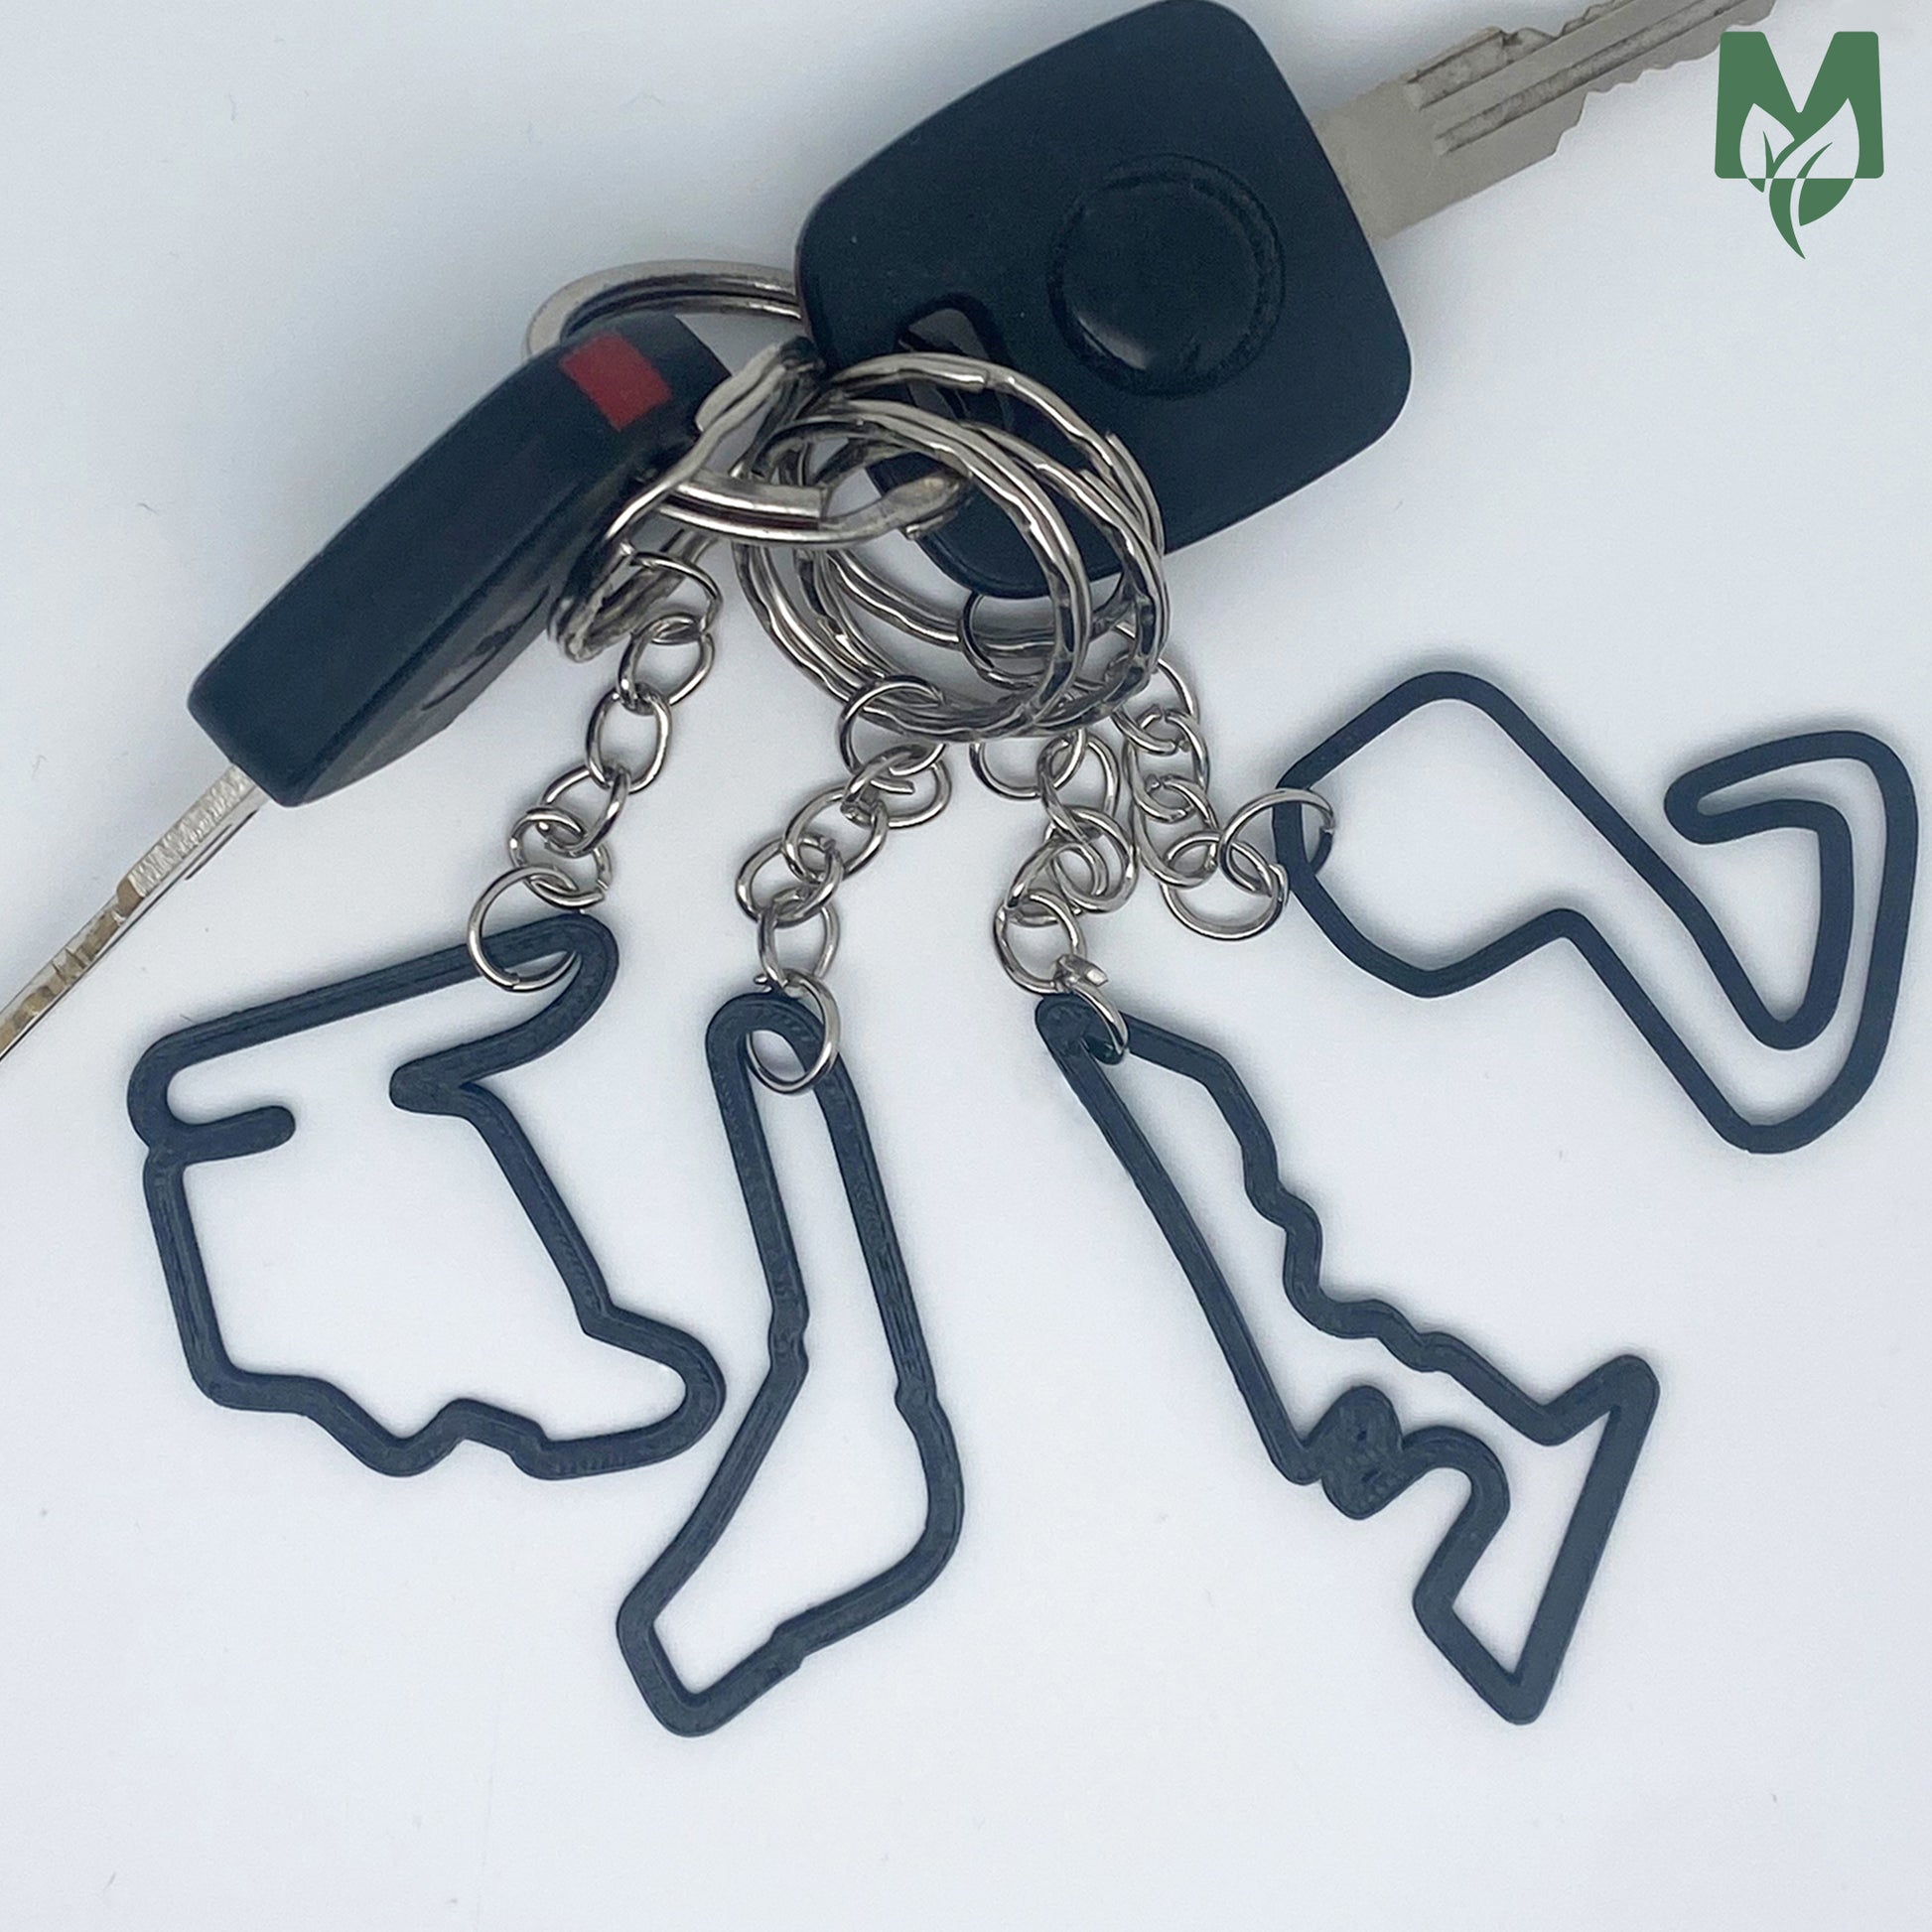 F1 gifts moto gp and motorsport circuit keychains